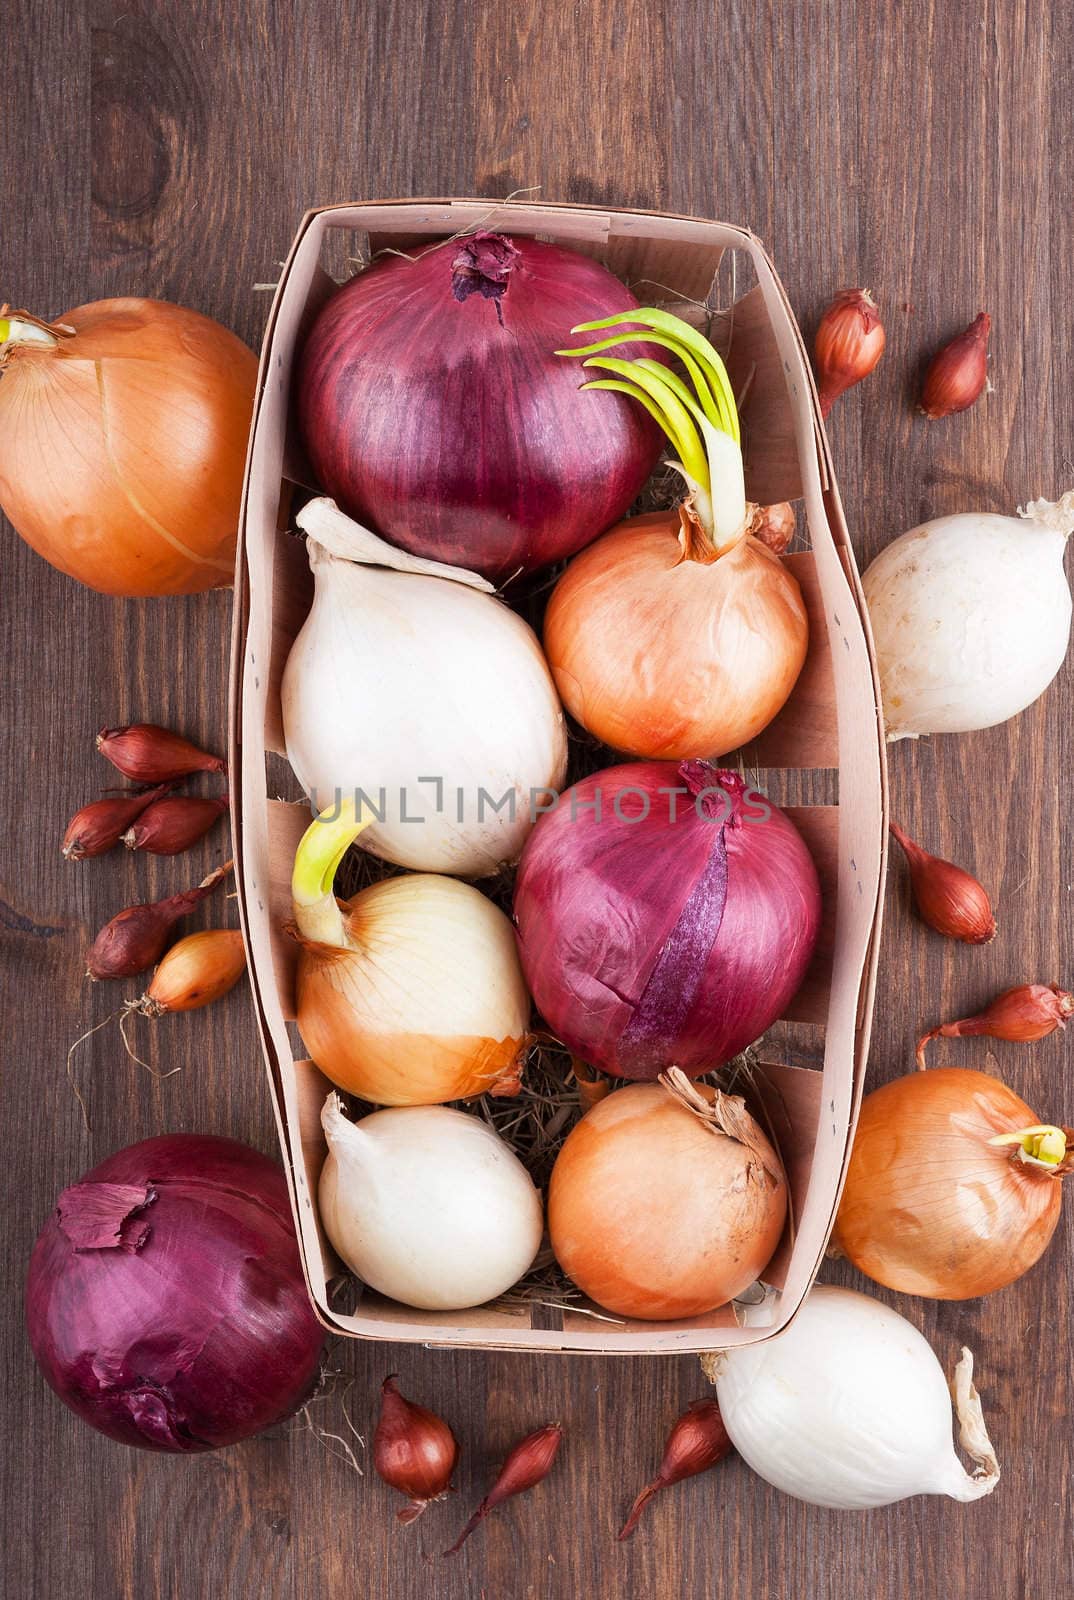 Different varieties of onions on a kitchen board and wooden surface